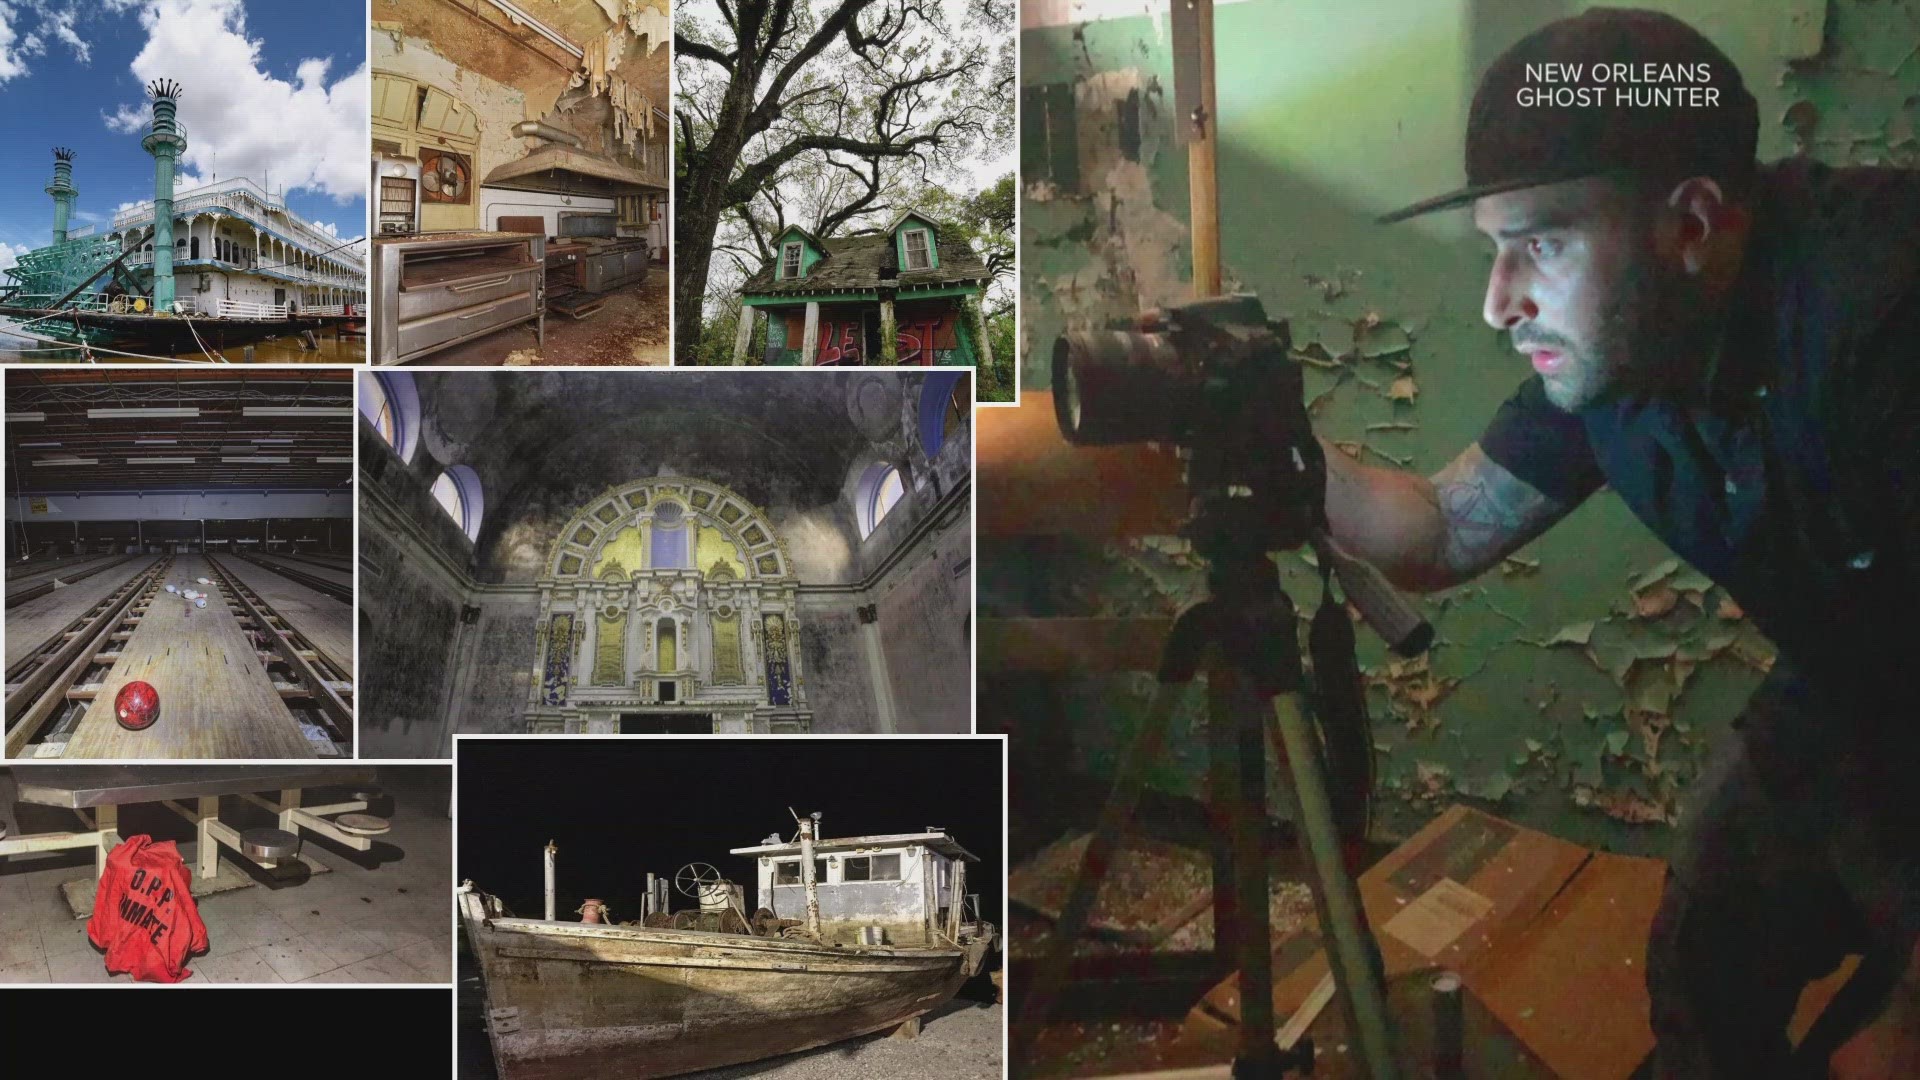 While the city cuts through red tape, New Orleans’ many urban explorers risk arrest, and sometimes even risk their lives, to show us what lies beneath.